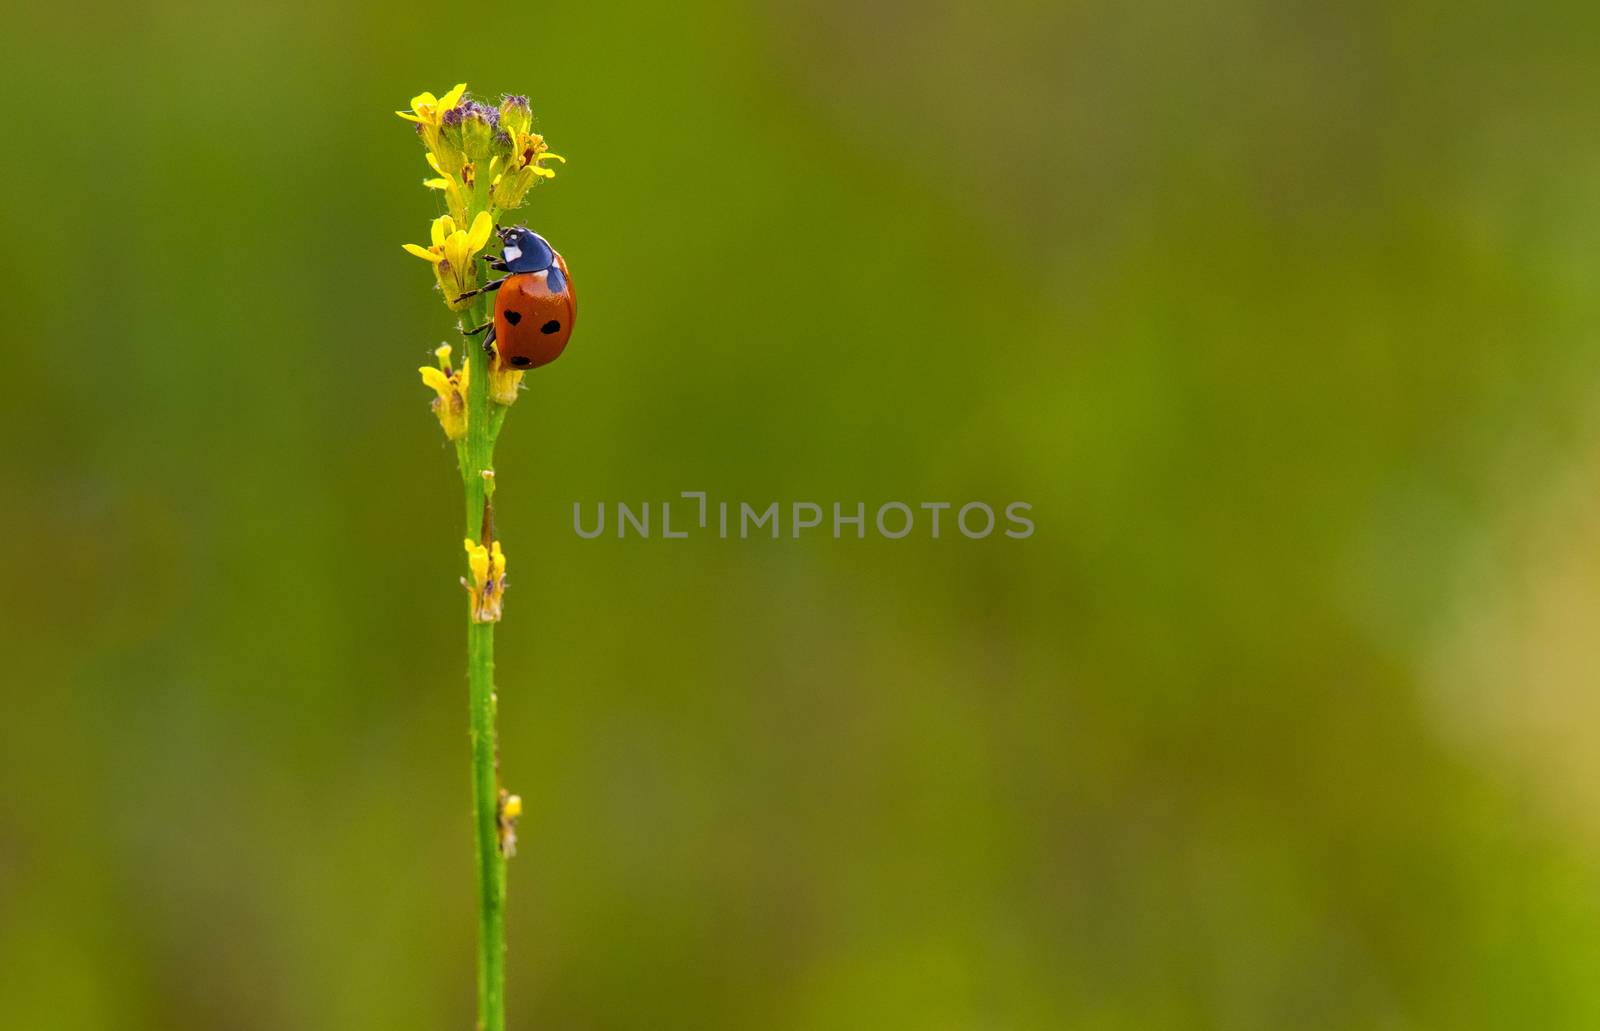 A ladybug perching on the top of a weed